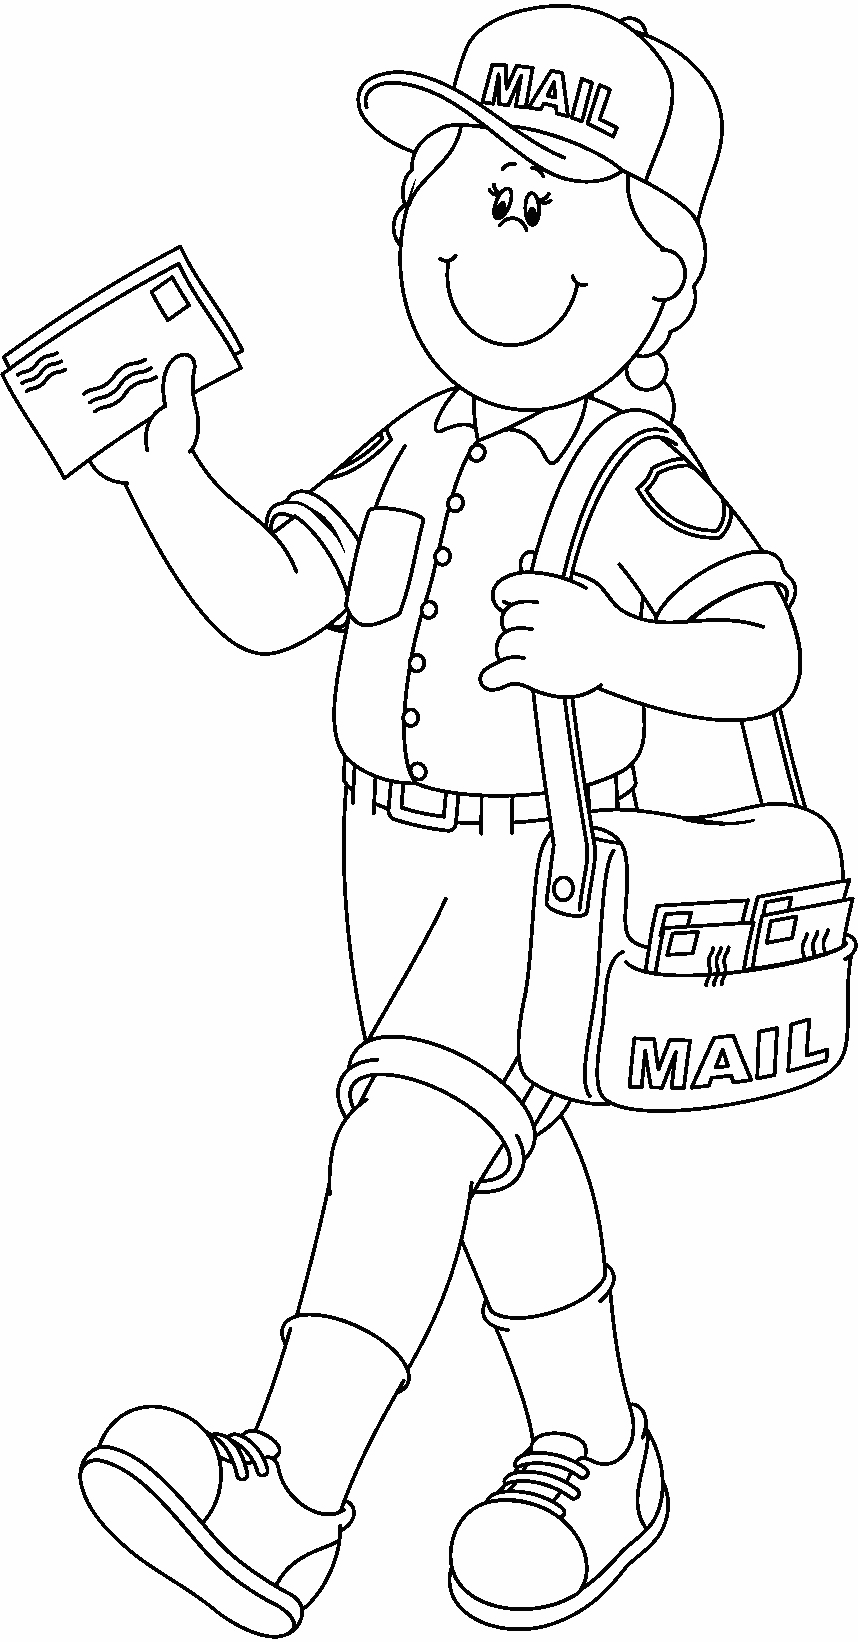 Mail Carrier Coloring Page